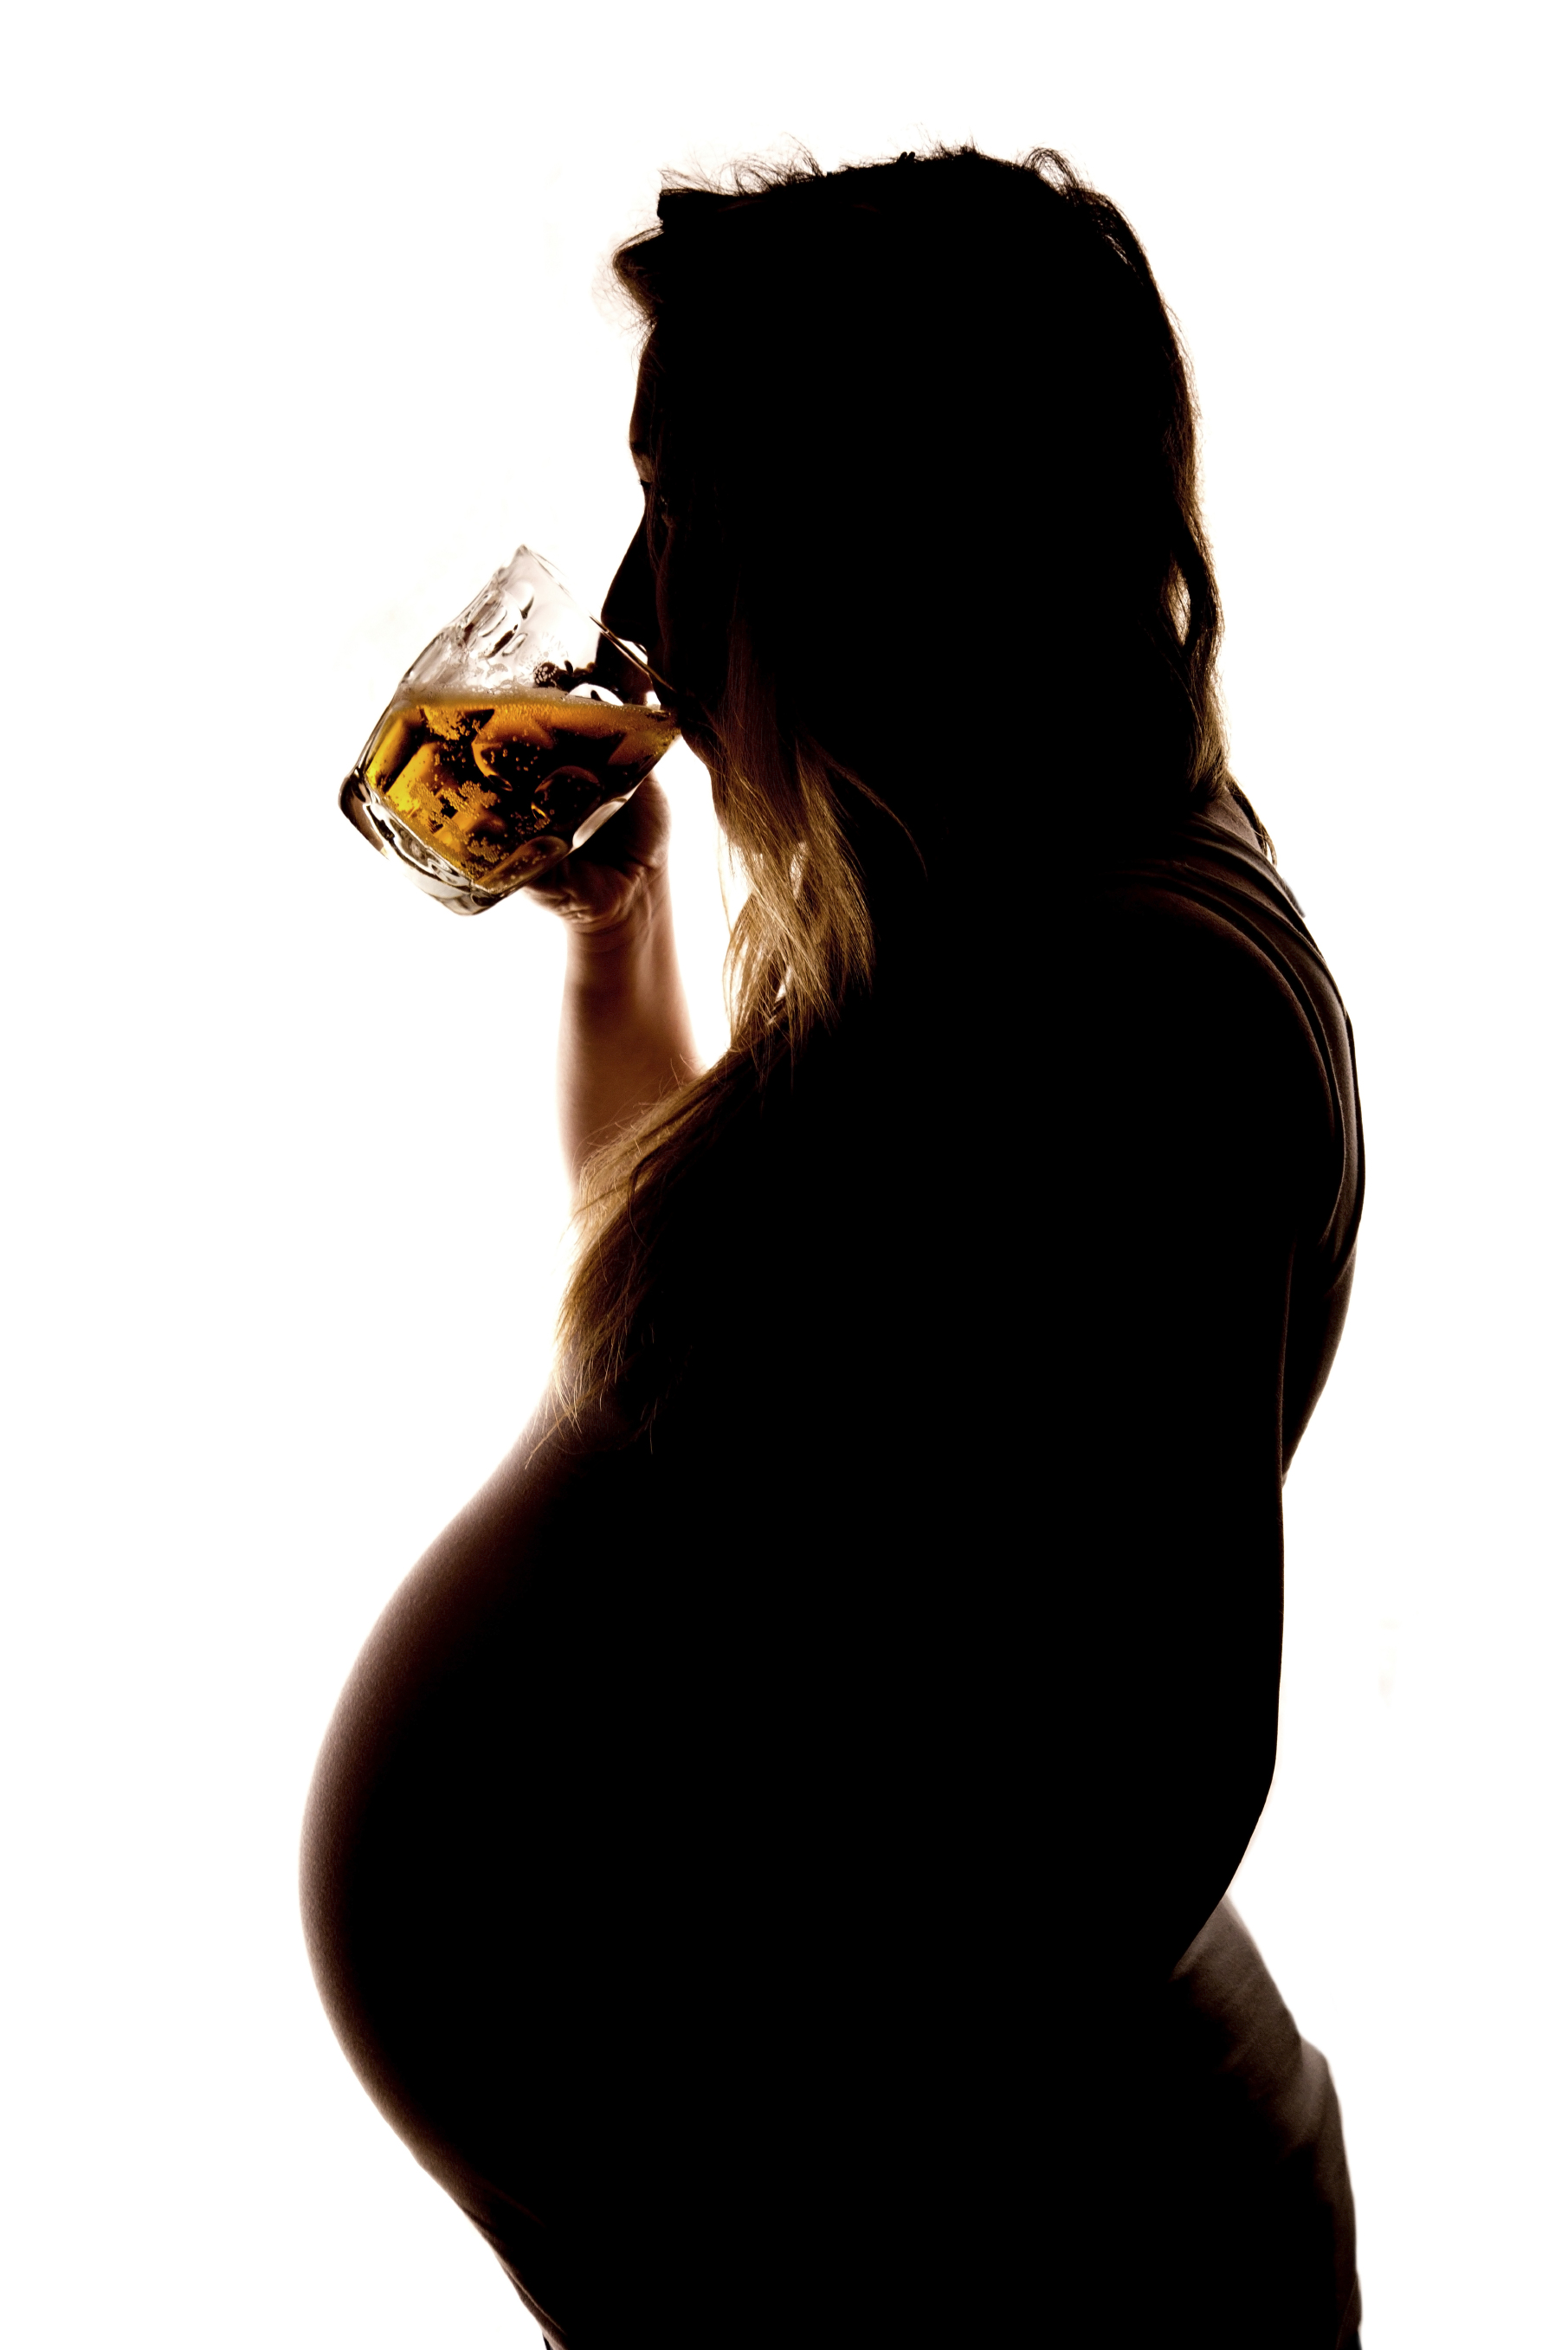 Should It Be Illegal to Deny a Pregnant Woman a Drink?